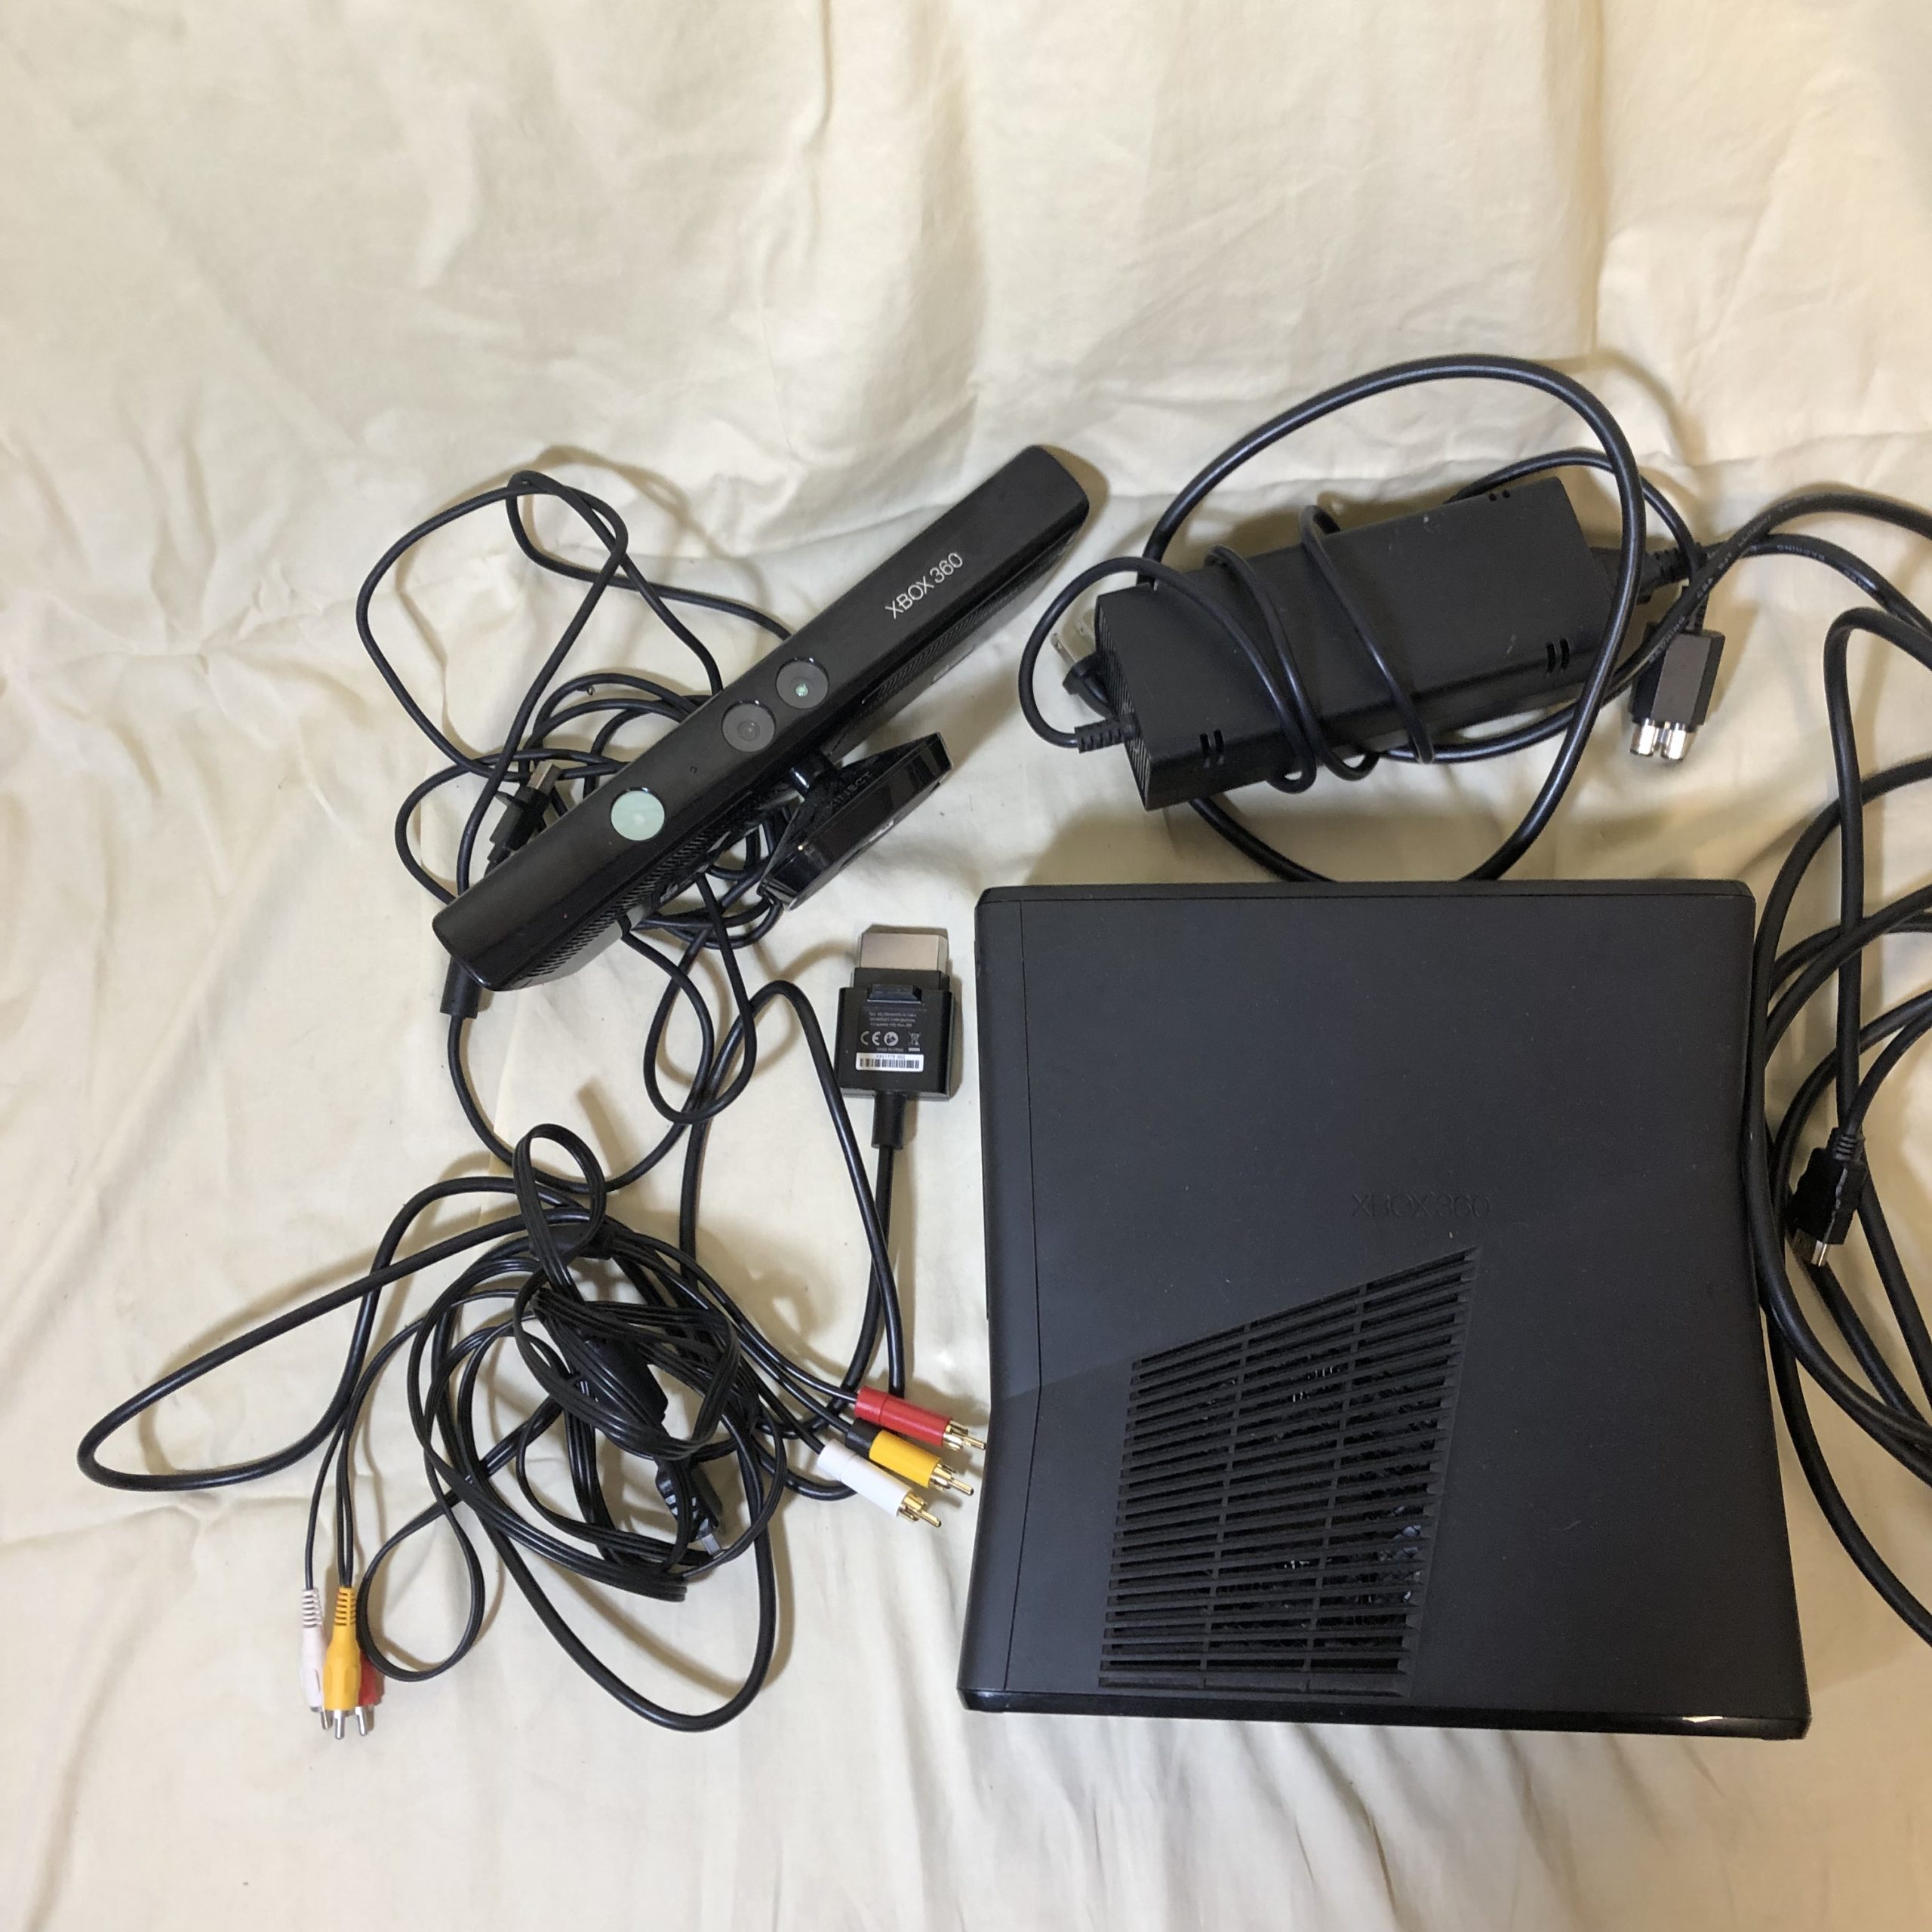 Xbox 360 4GB Console with Kinect